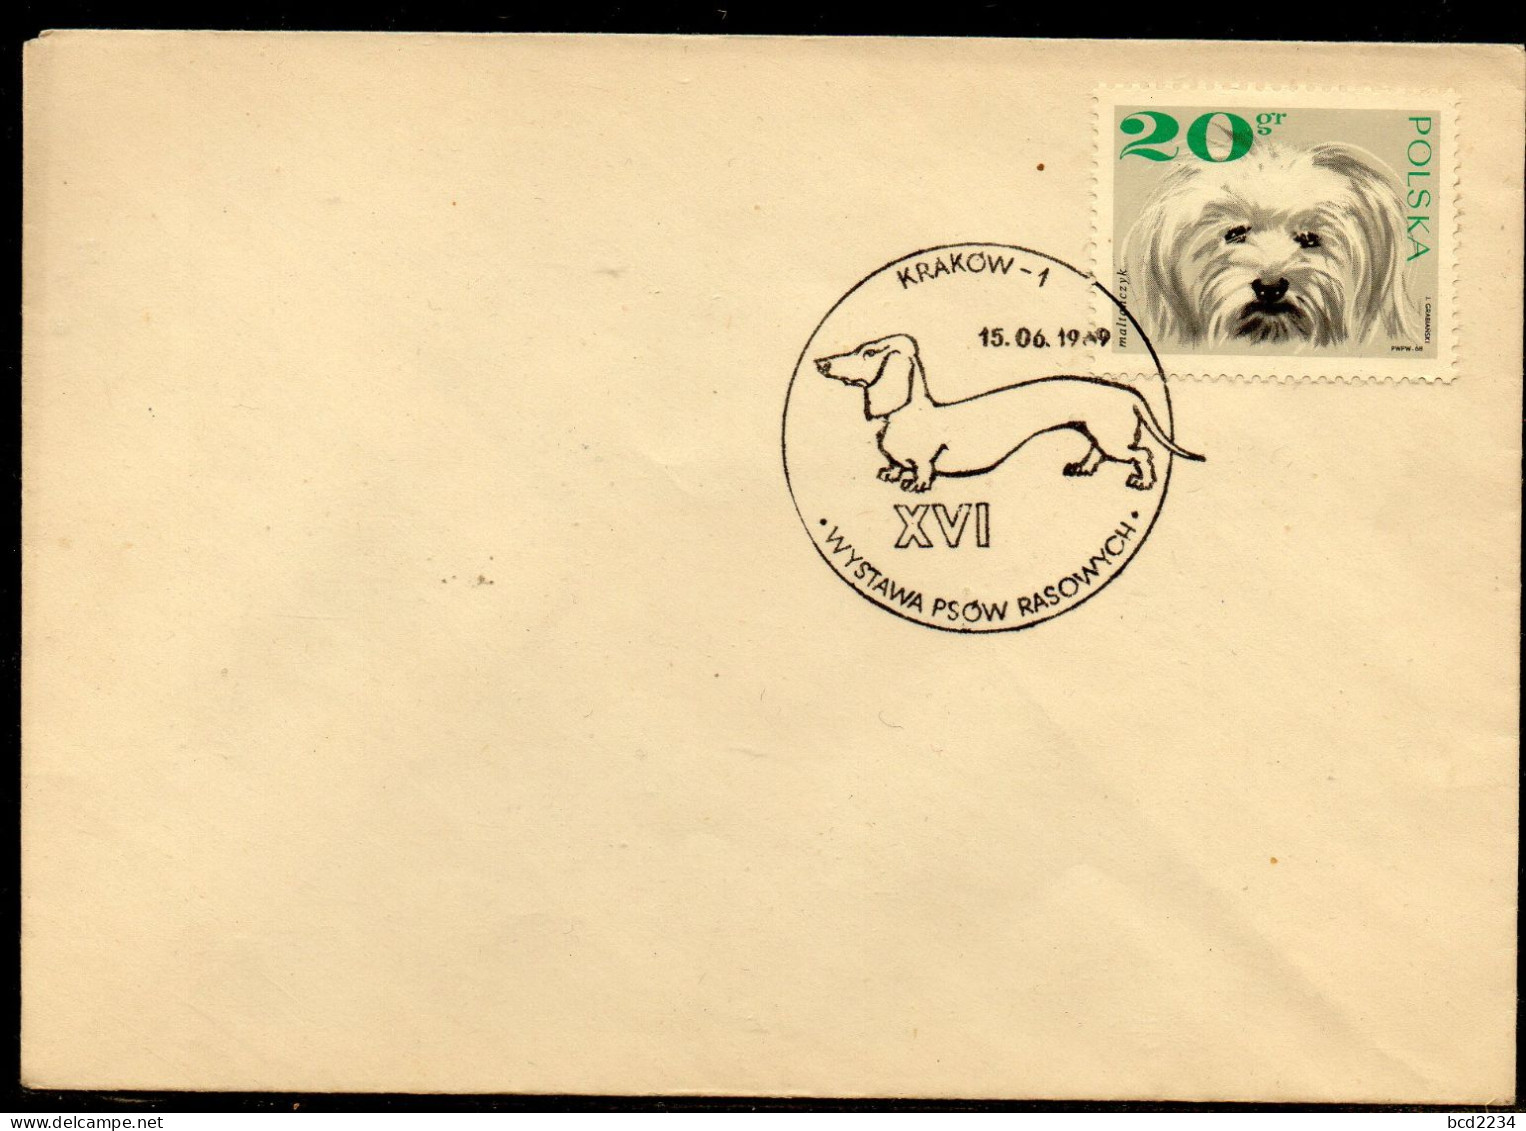 POLAND 1969 XVI PEDIGREE DOG SHOW KRAKOW SPECIAL CANCEL ON COVER DACHSHUND DOGS - Chiens